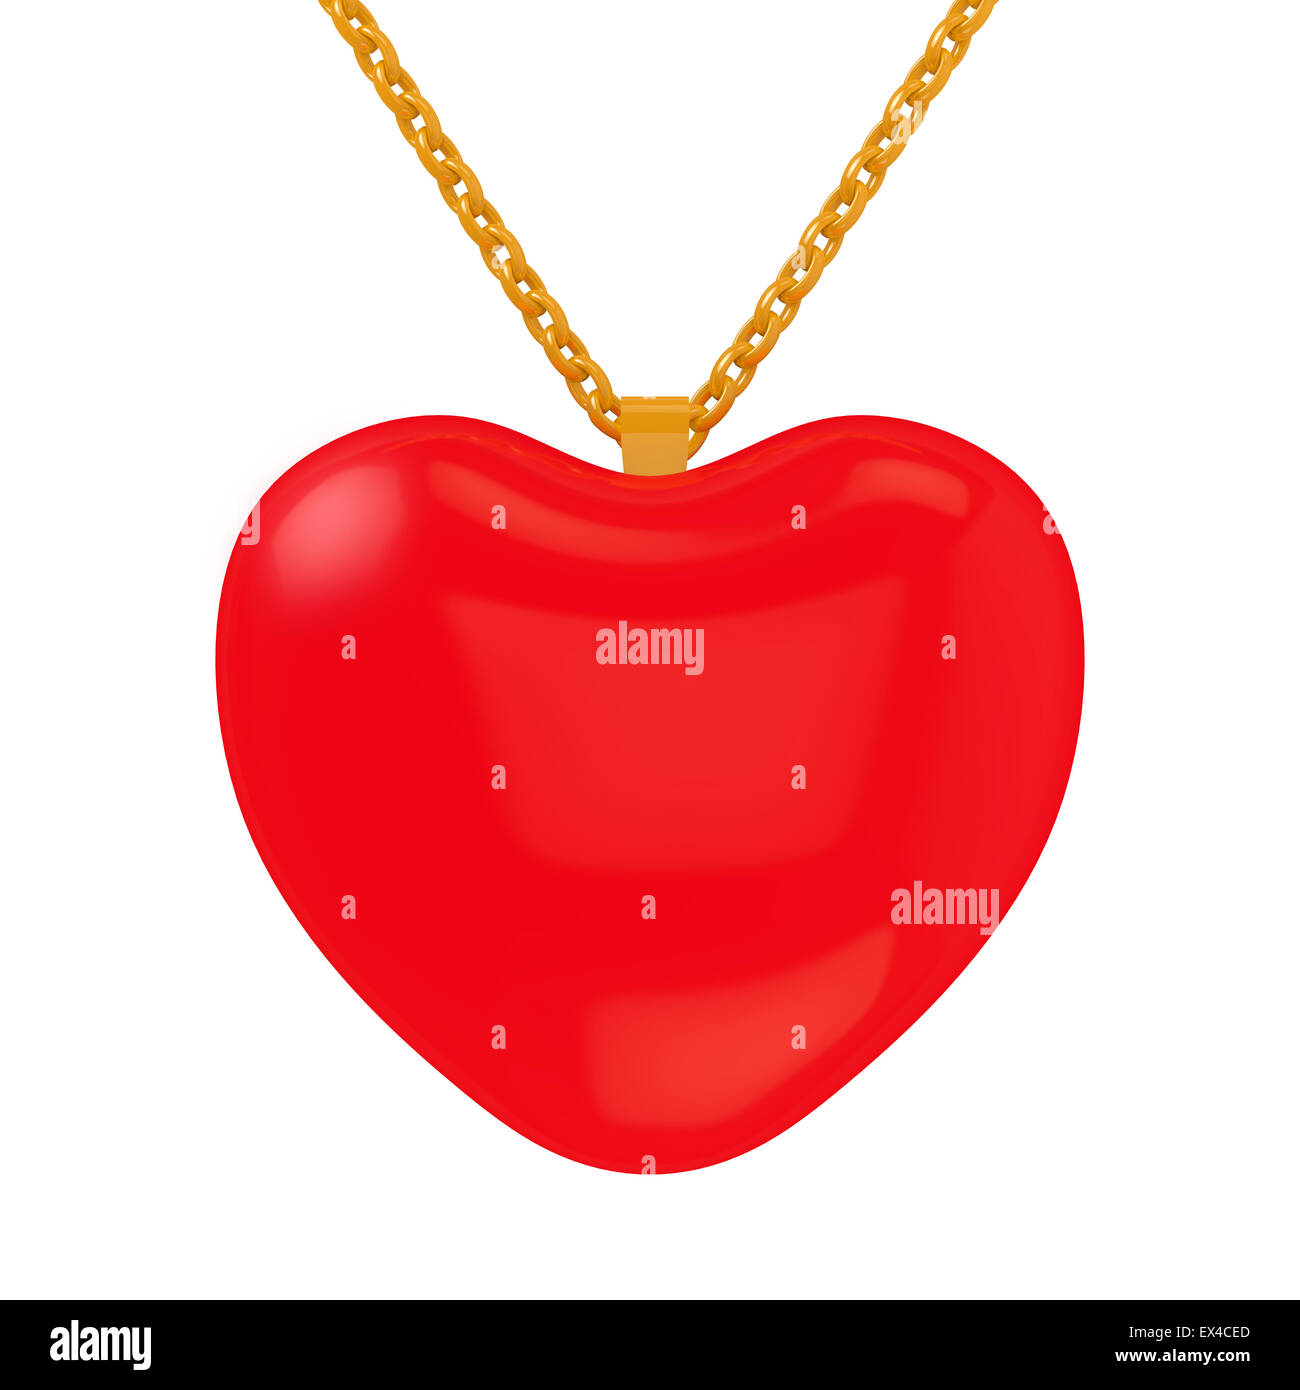 3D rendering of the Lowpoly heart on chain Stock Photo